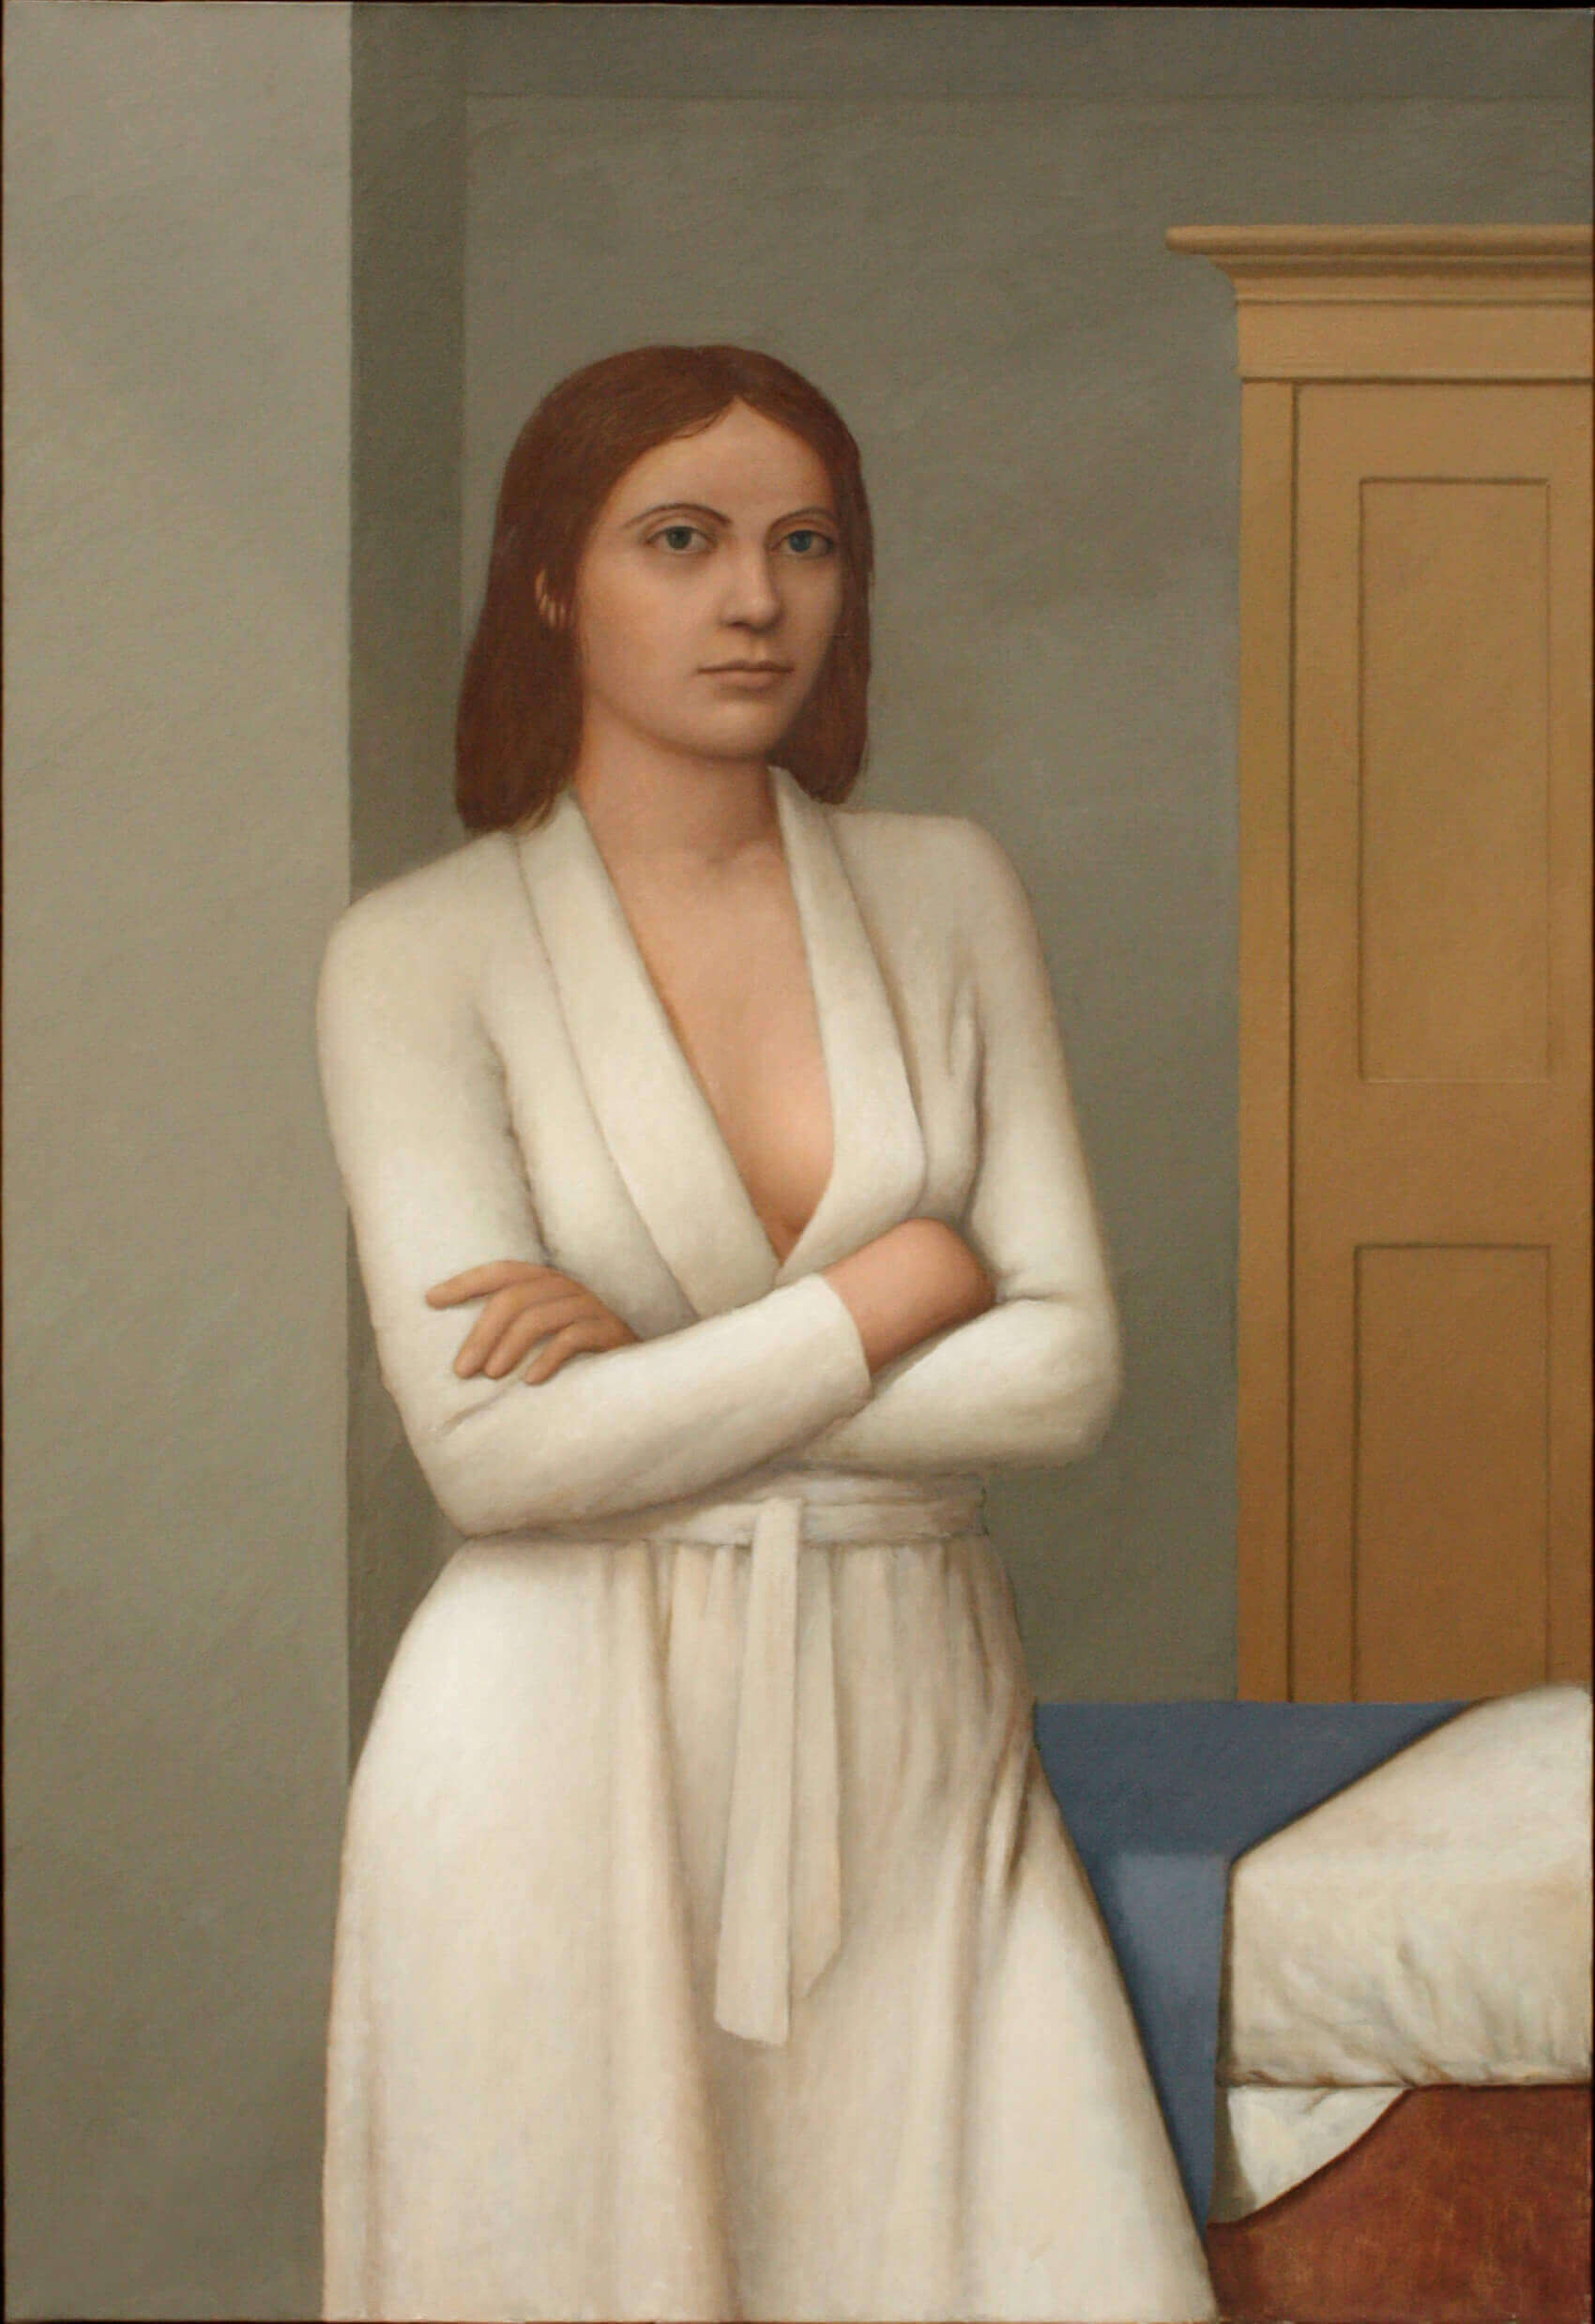 William Bailey, White Robe, 2007-8, oil on linen, 51 1/4 x 35 1/8 inches (courtesy of the artist and Betty Cuningham Gallery)